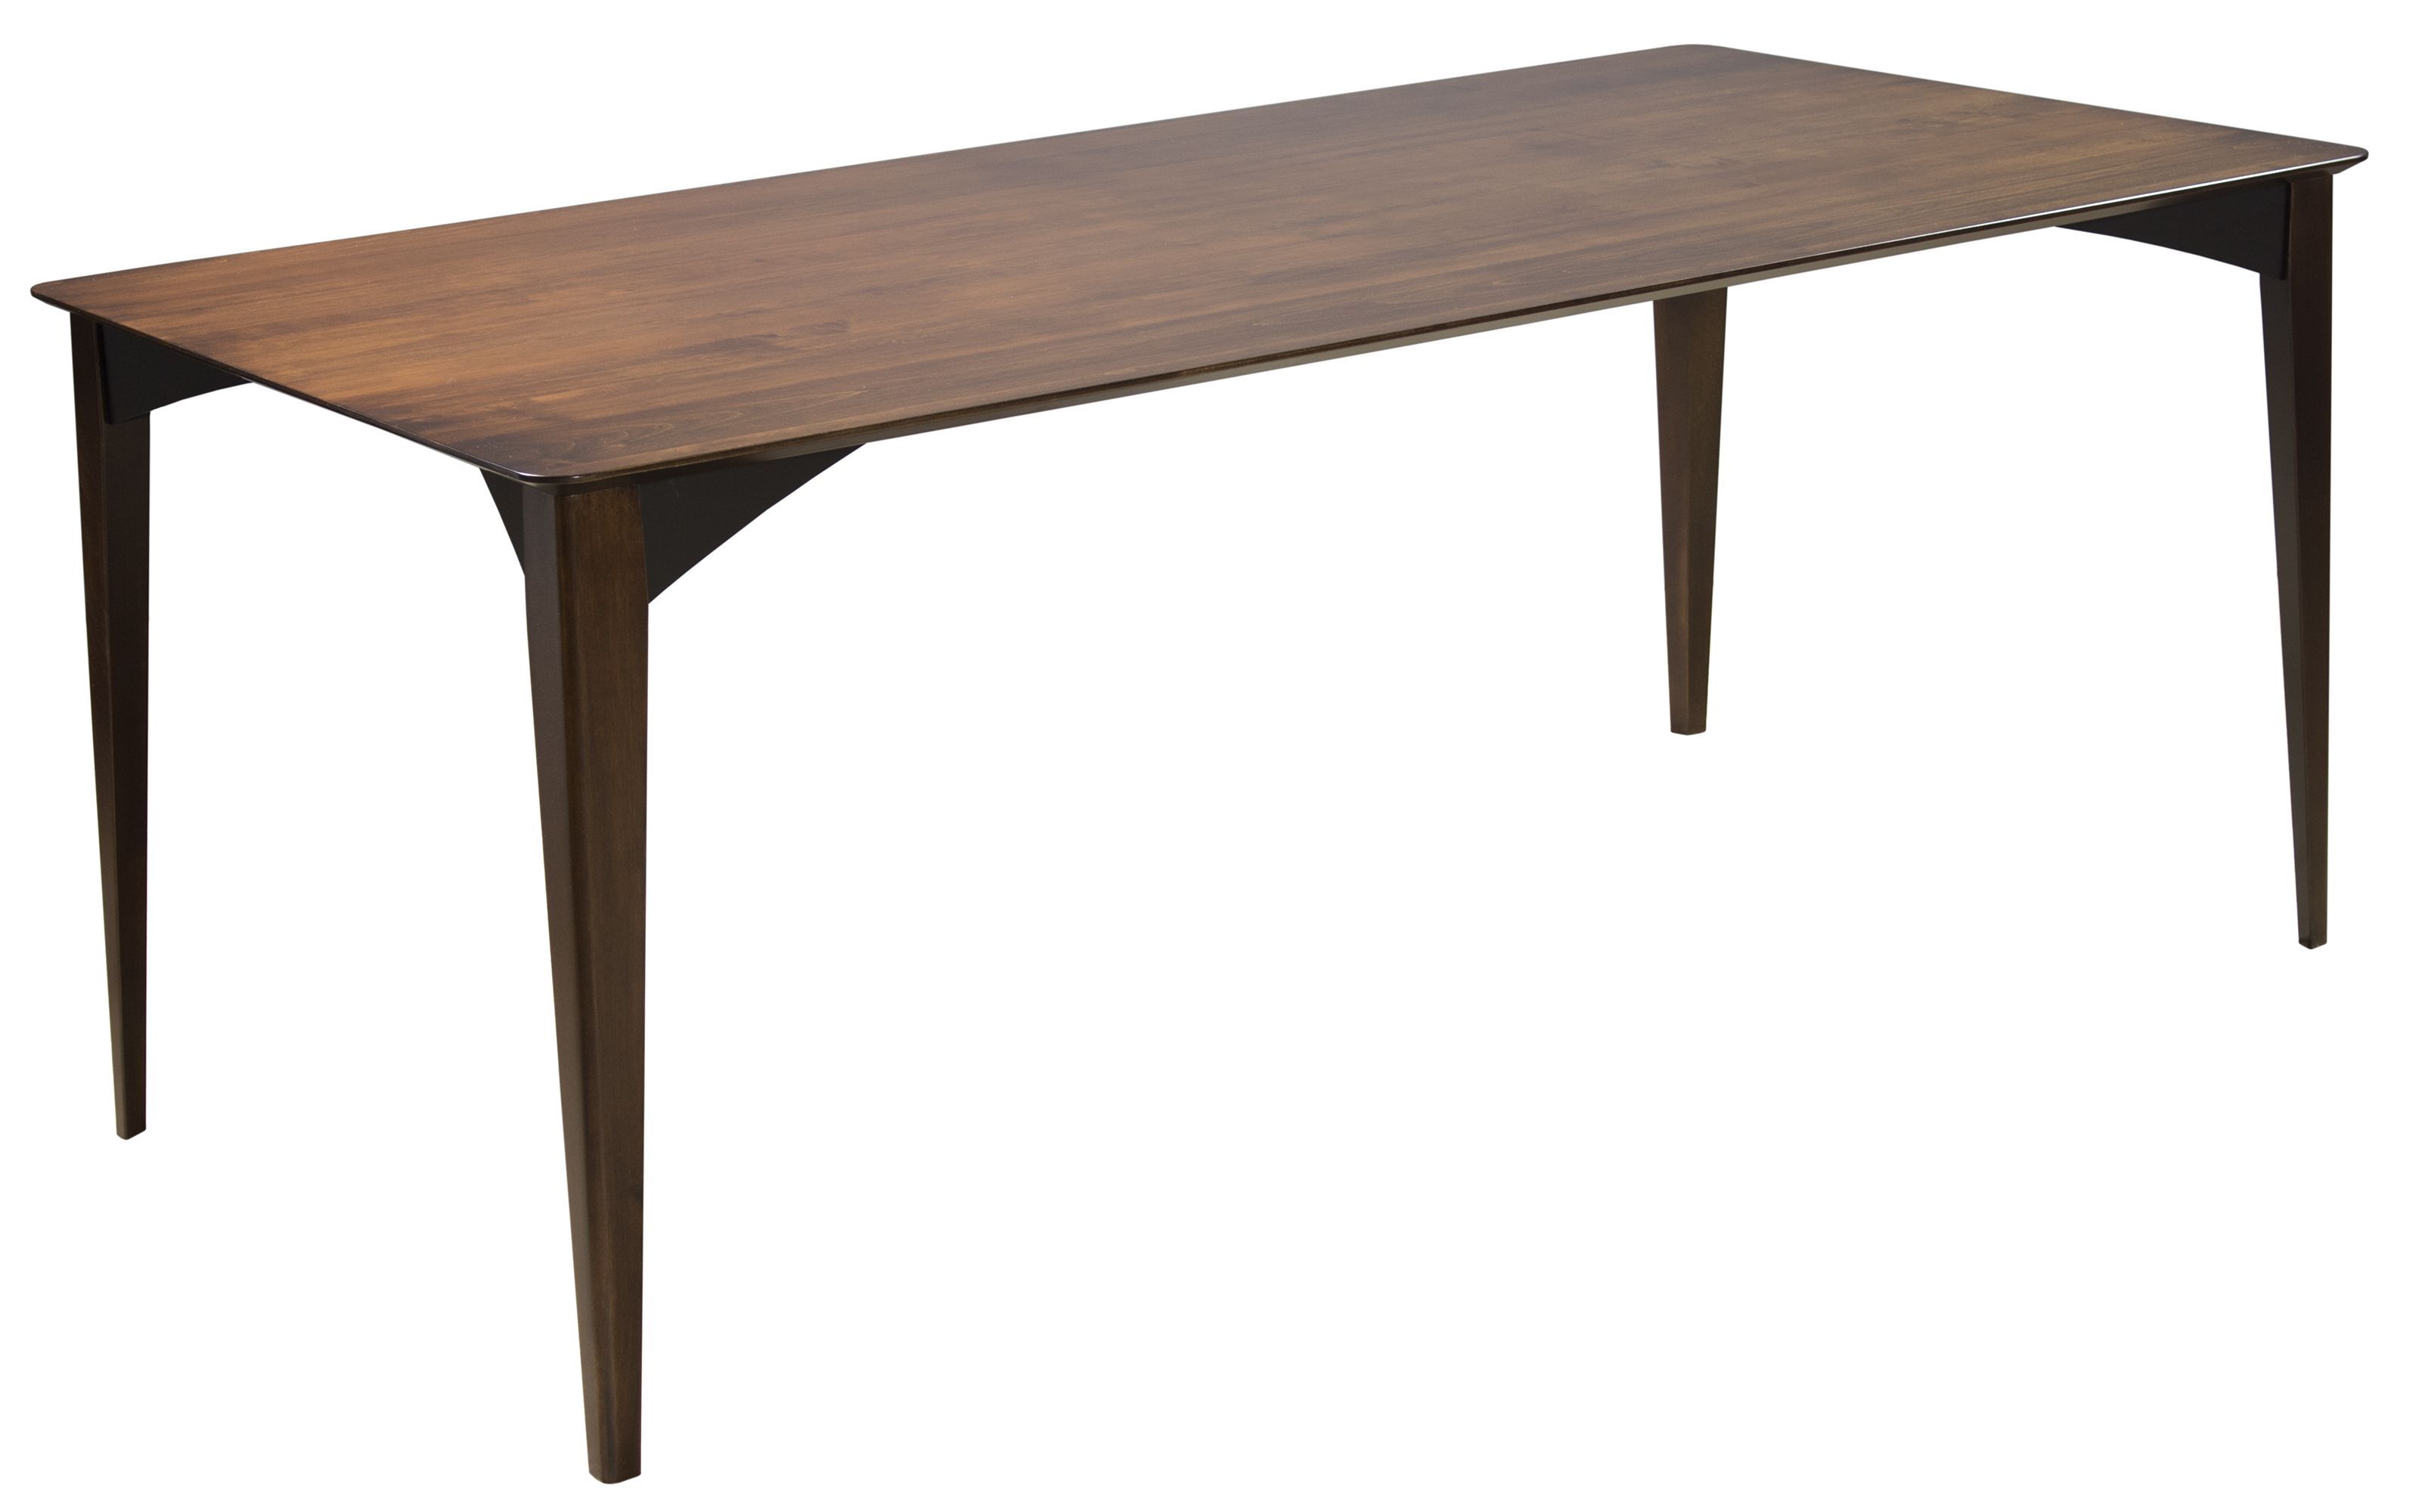 Remi Dining Table In Amaretto Finish From Saloom (View 8 of 30)